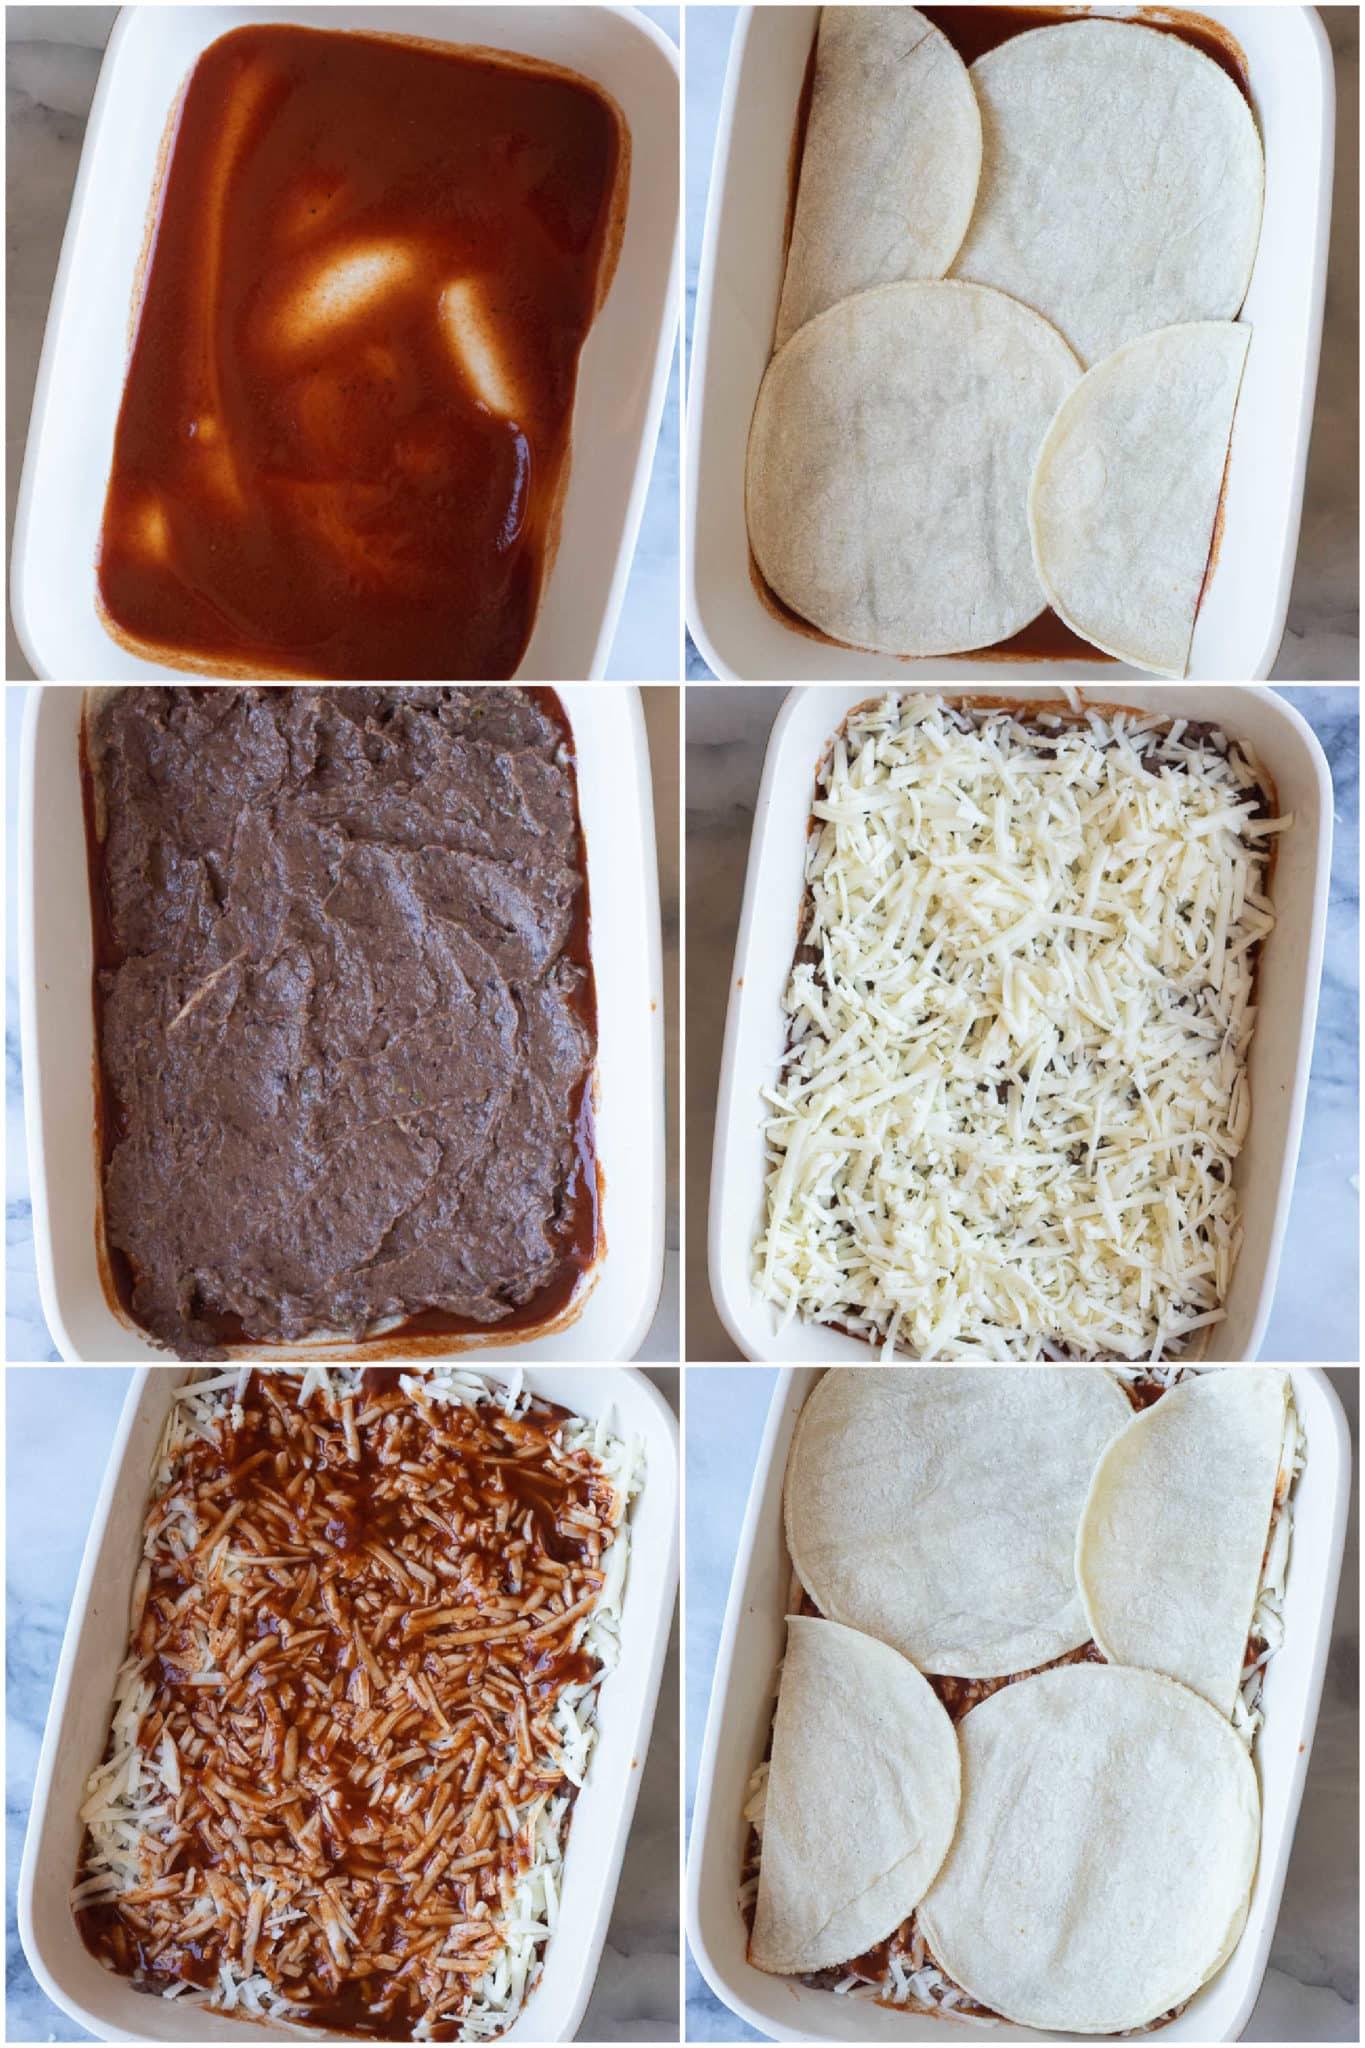 showing how to make a bean and cheese enchilada casserole by layering all the ingredients in a baking dish